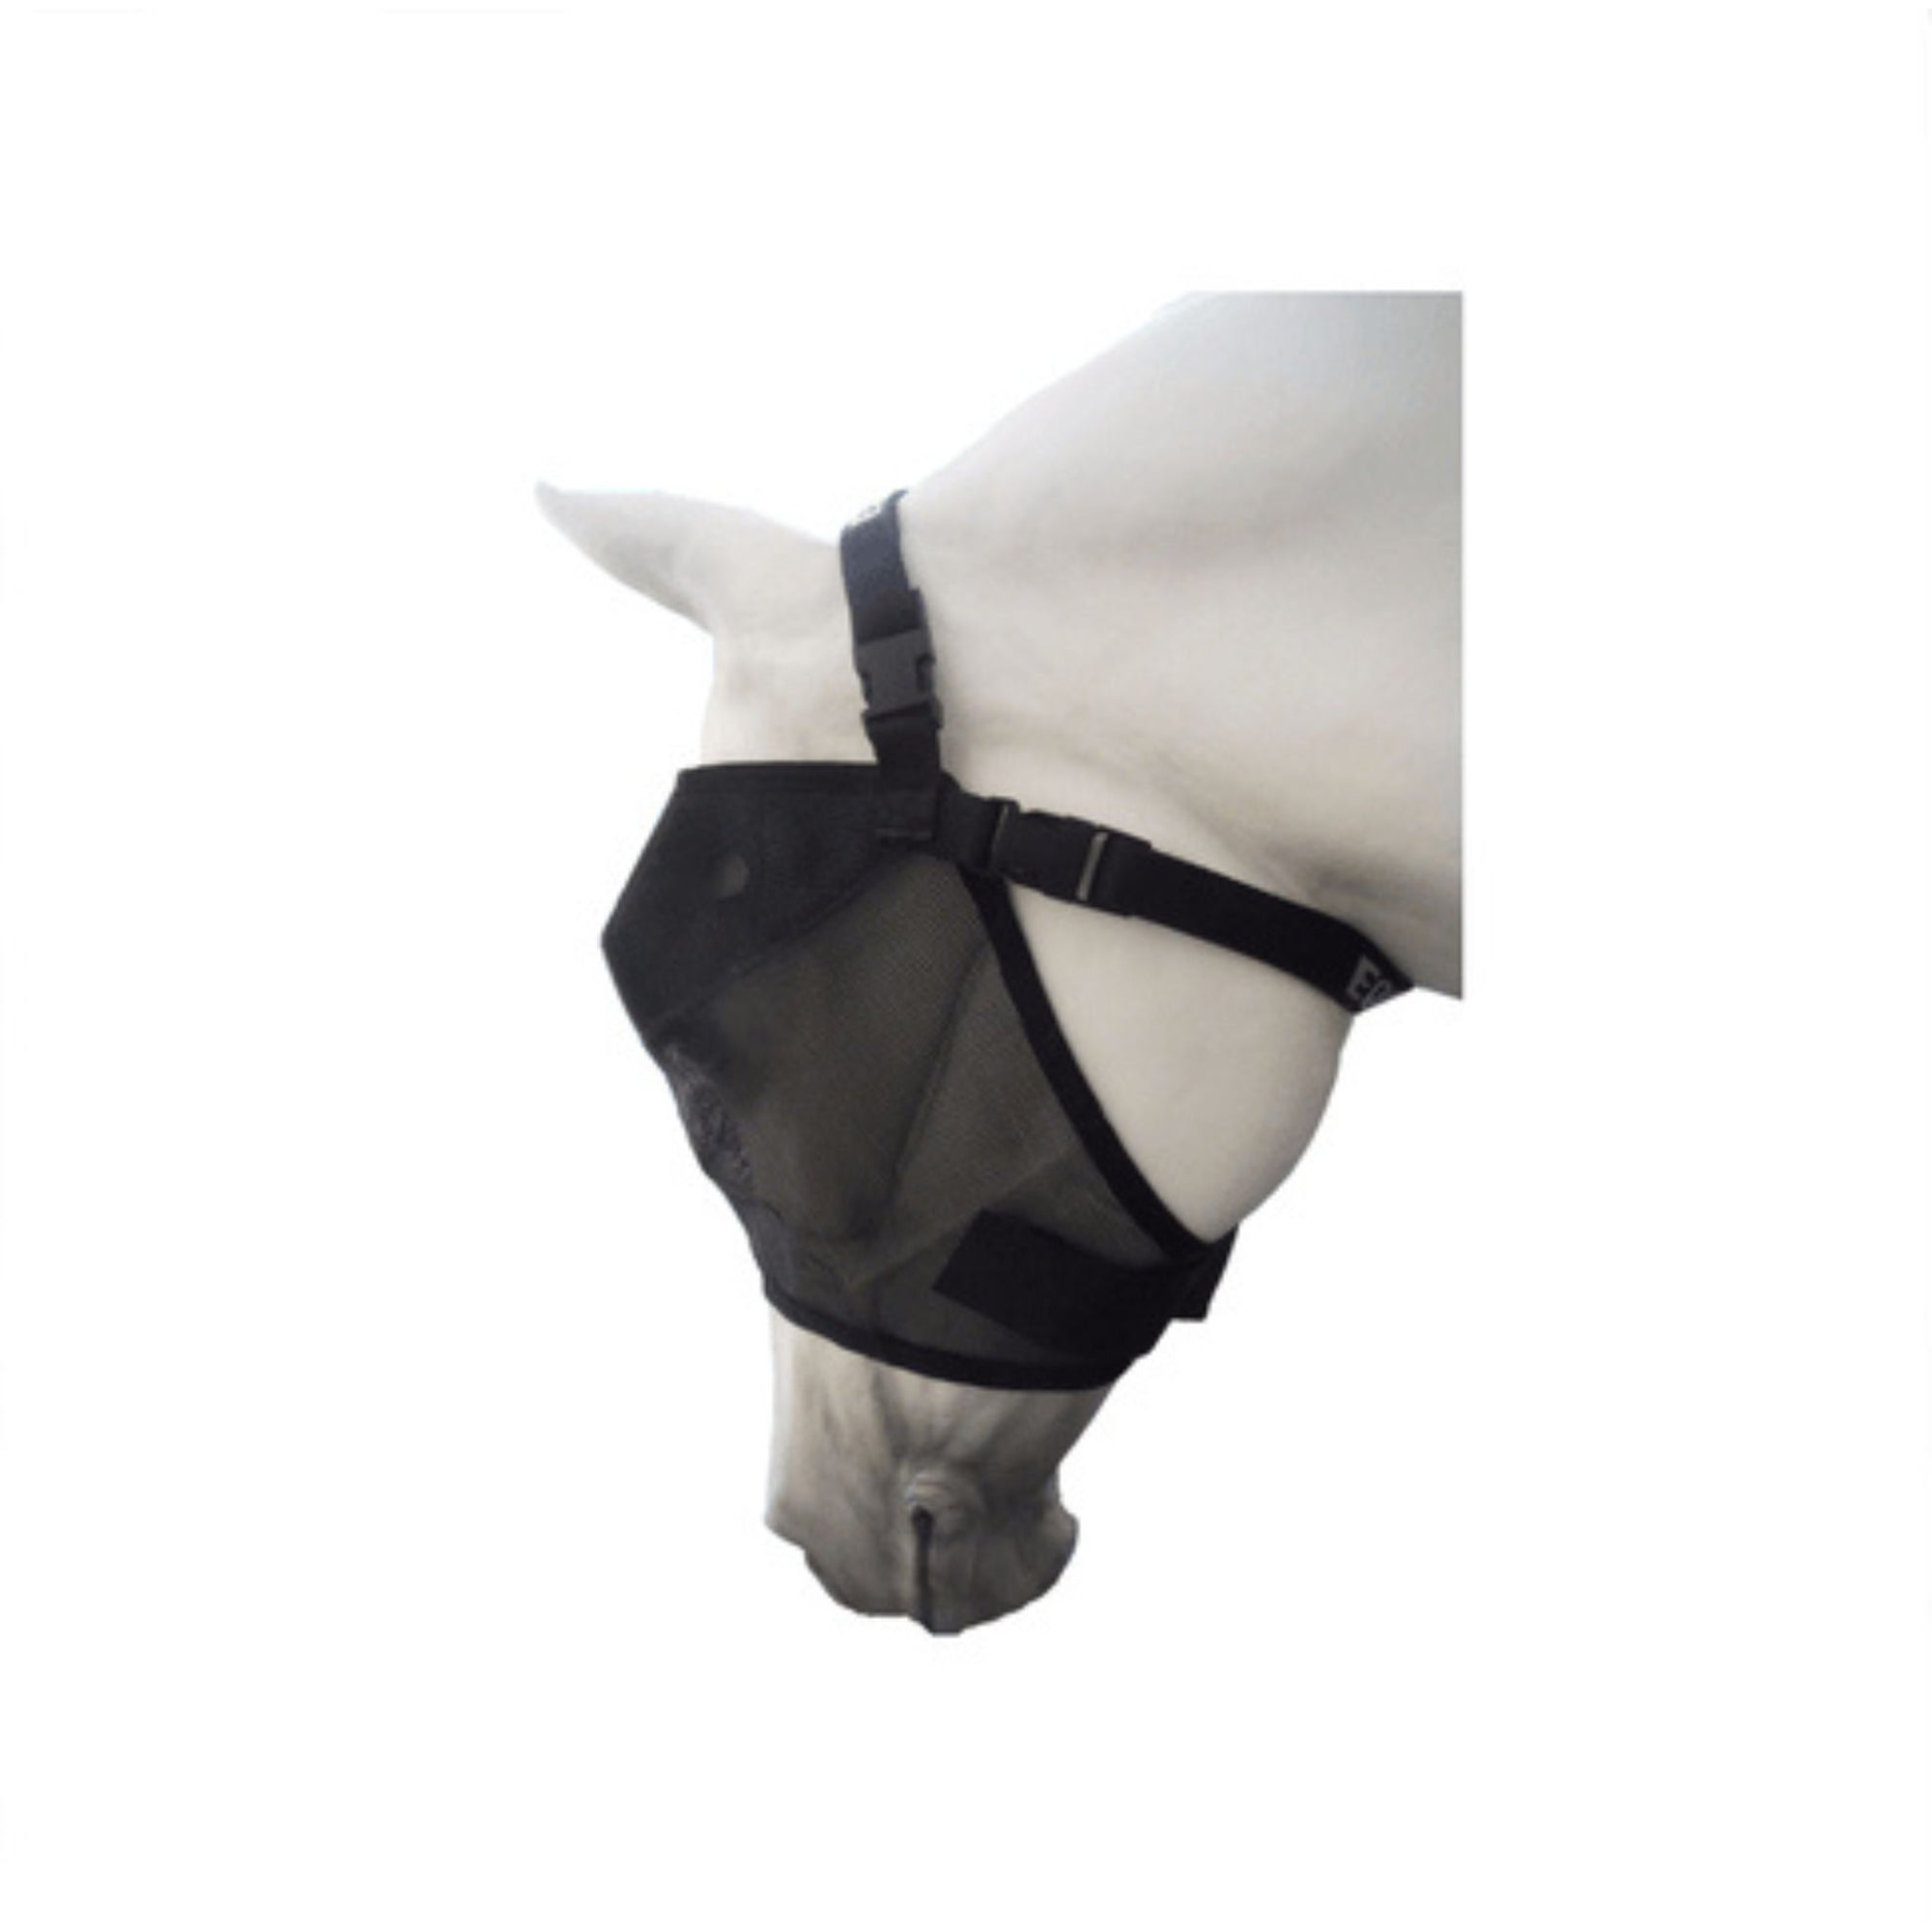 Horse model wearing black fly veil with no nose flap or ears.